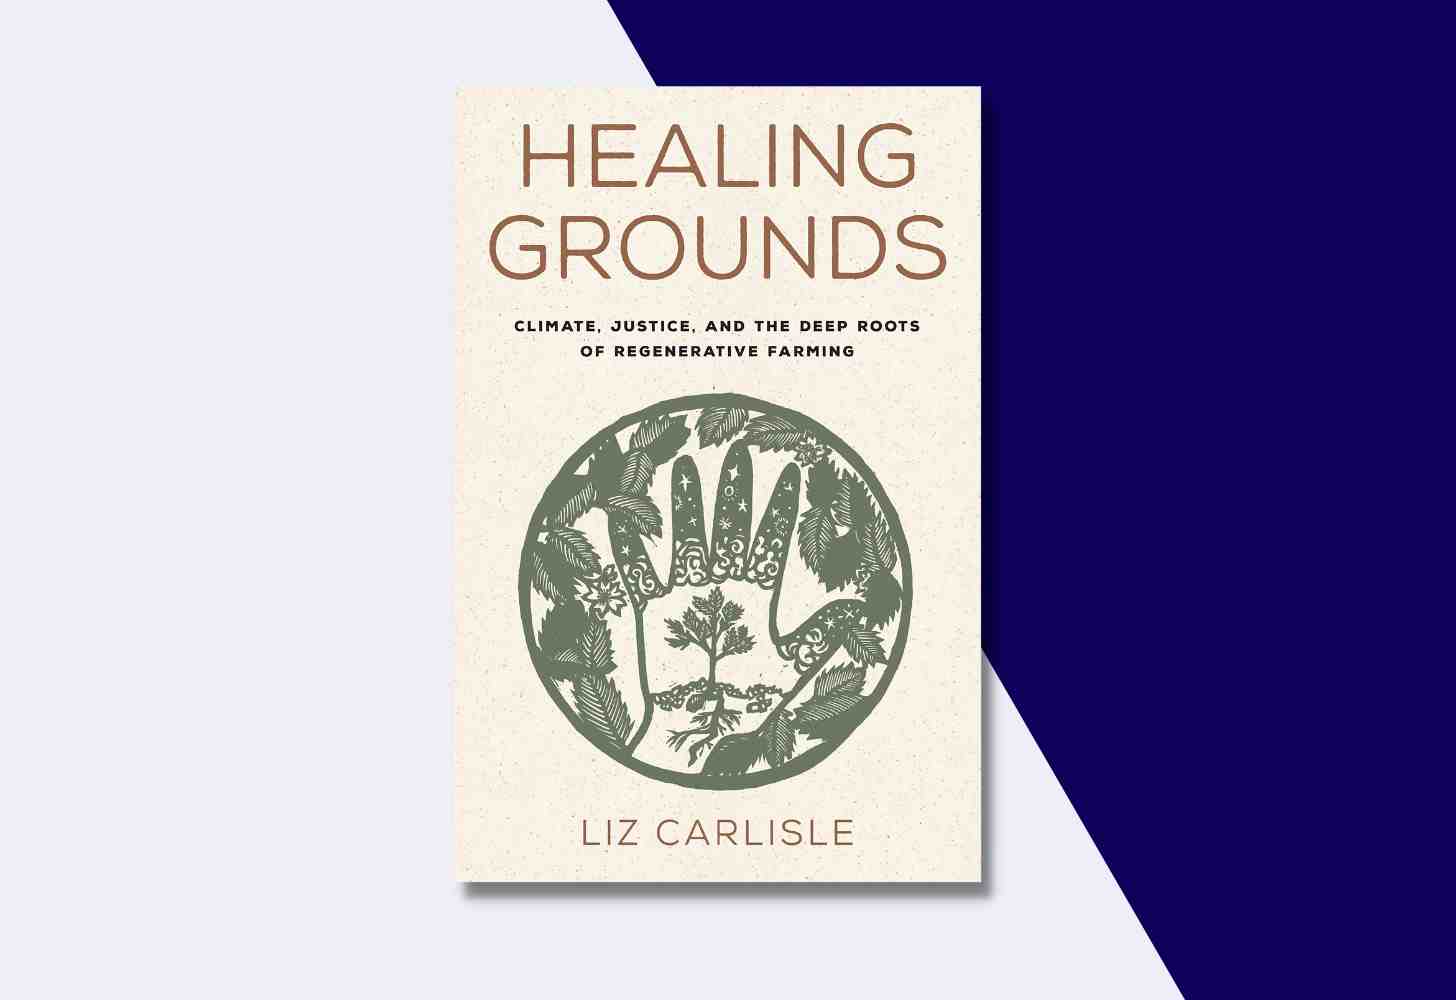 The Cover Of: “Healing Grounds: Climate, Justice, and the Deep Roots of Regenerative Farming” by Liz Carlisle